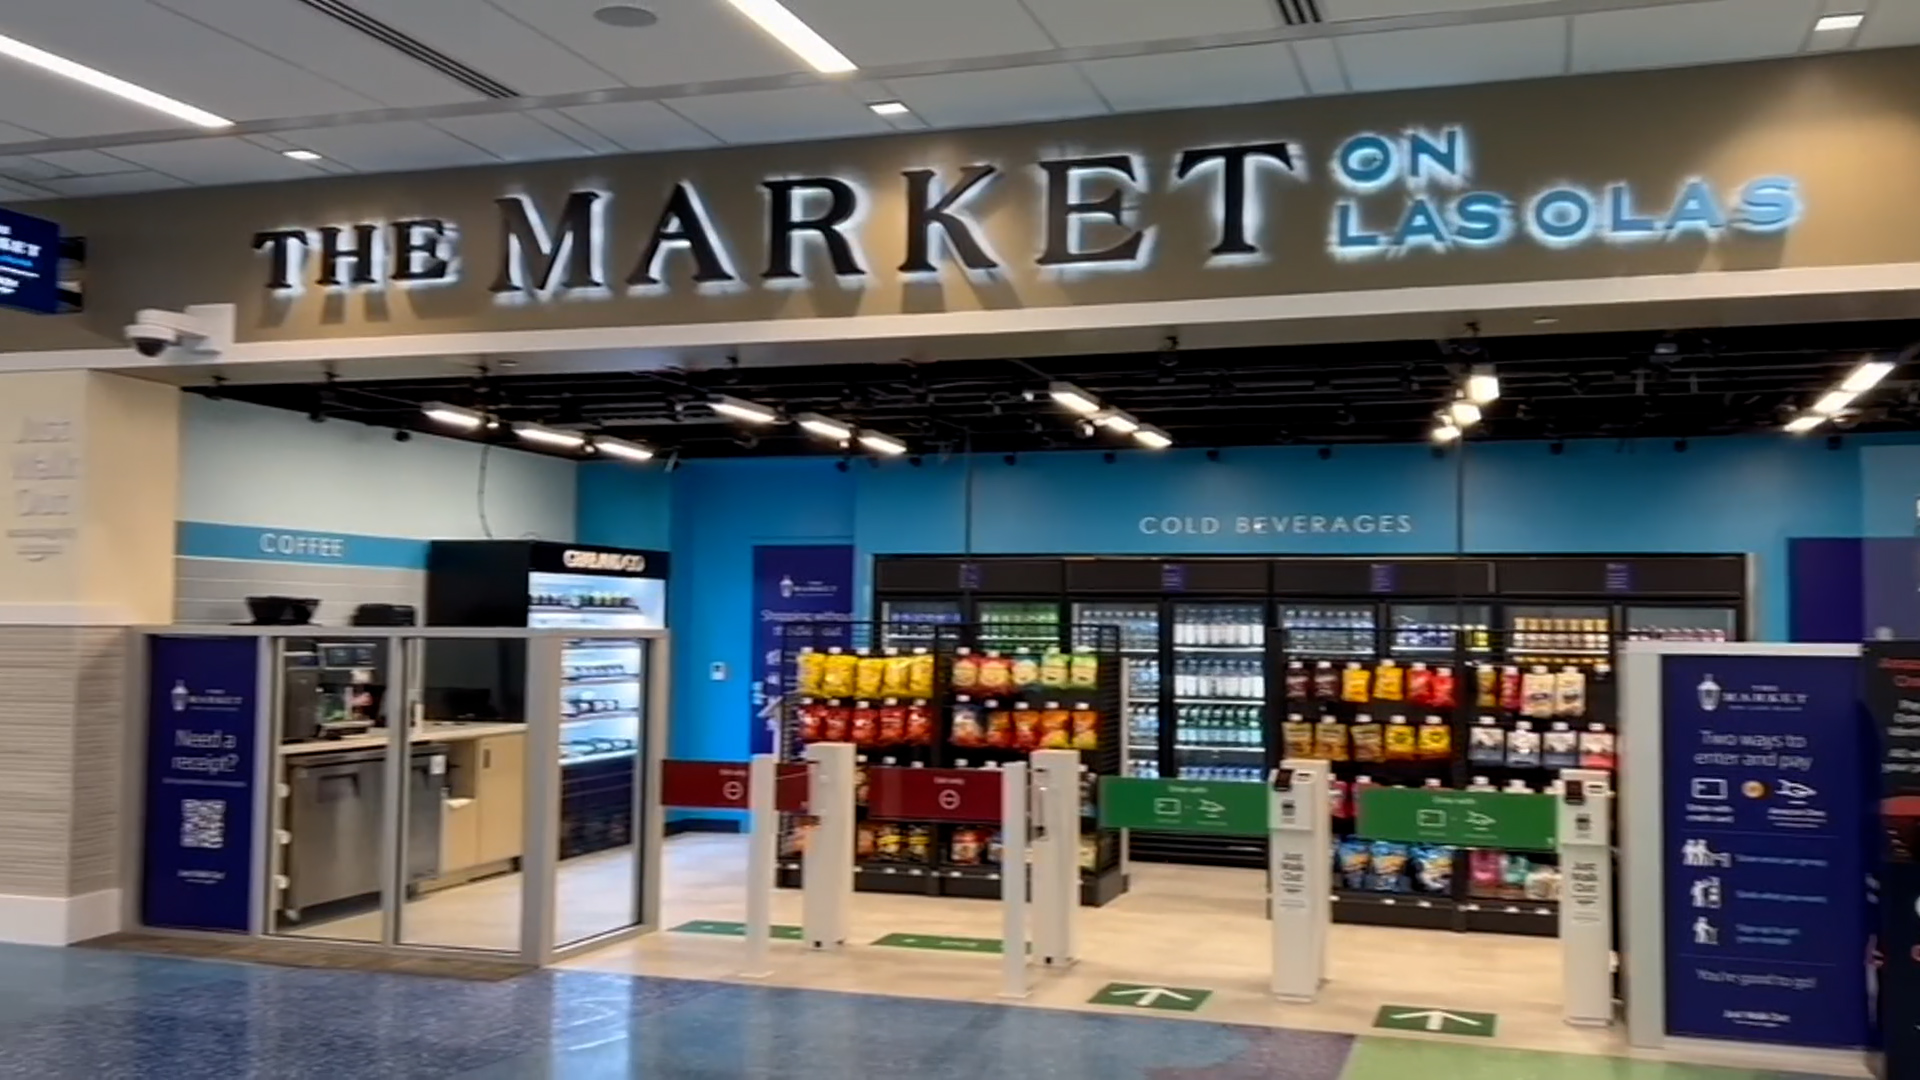 NBC six South Florida Reports on Fort Lauderdale Airport’s New “Checkout-Free” Shop Powered by Amazon Technologies